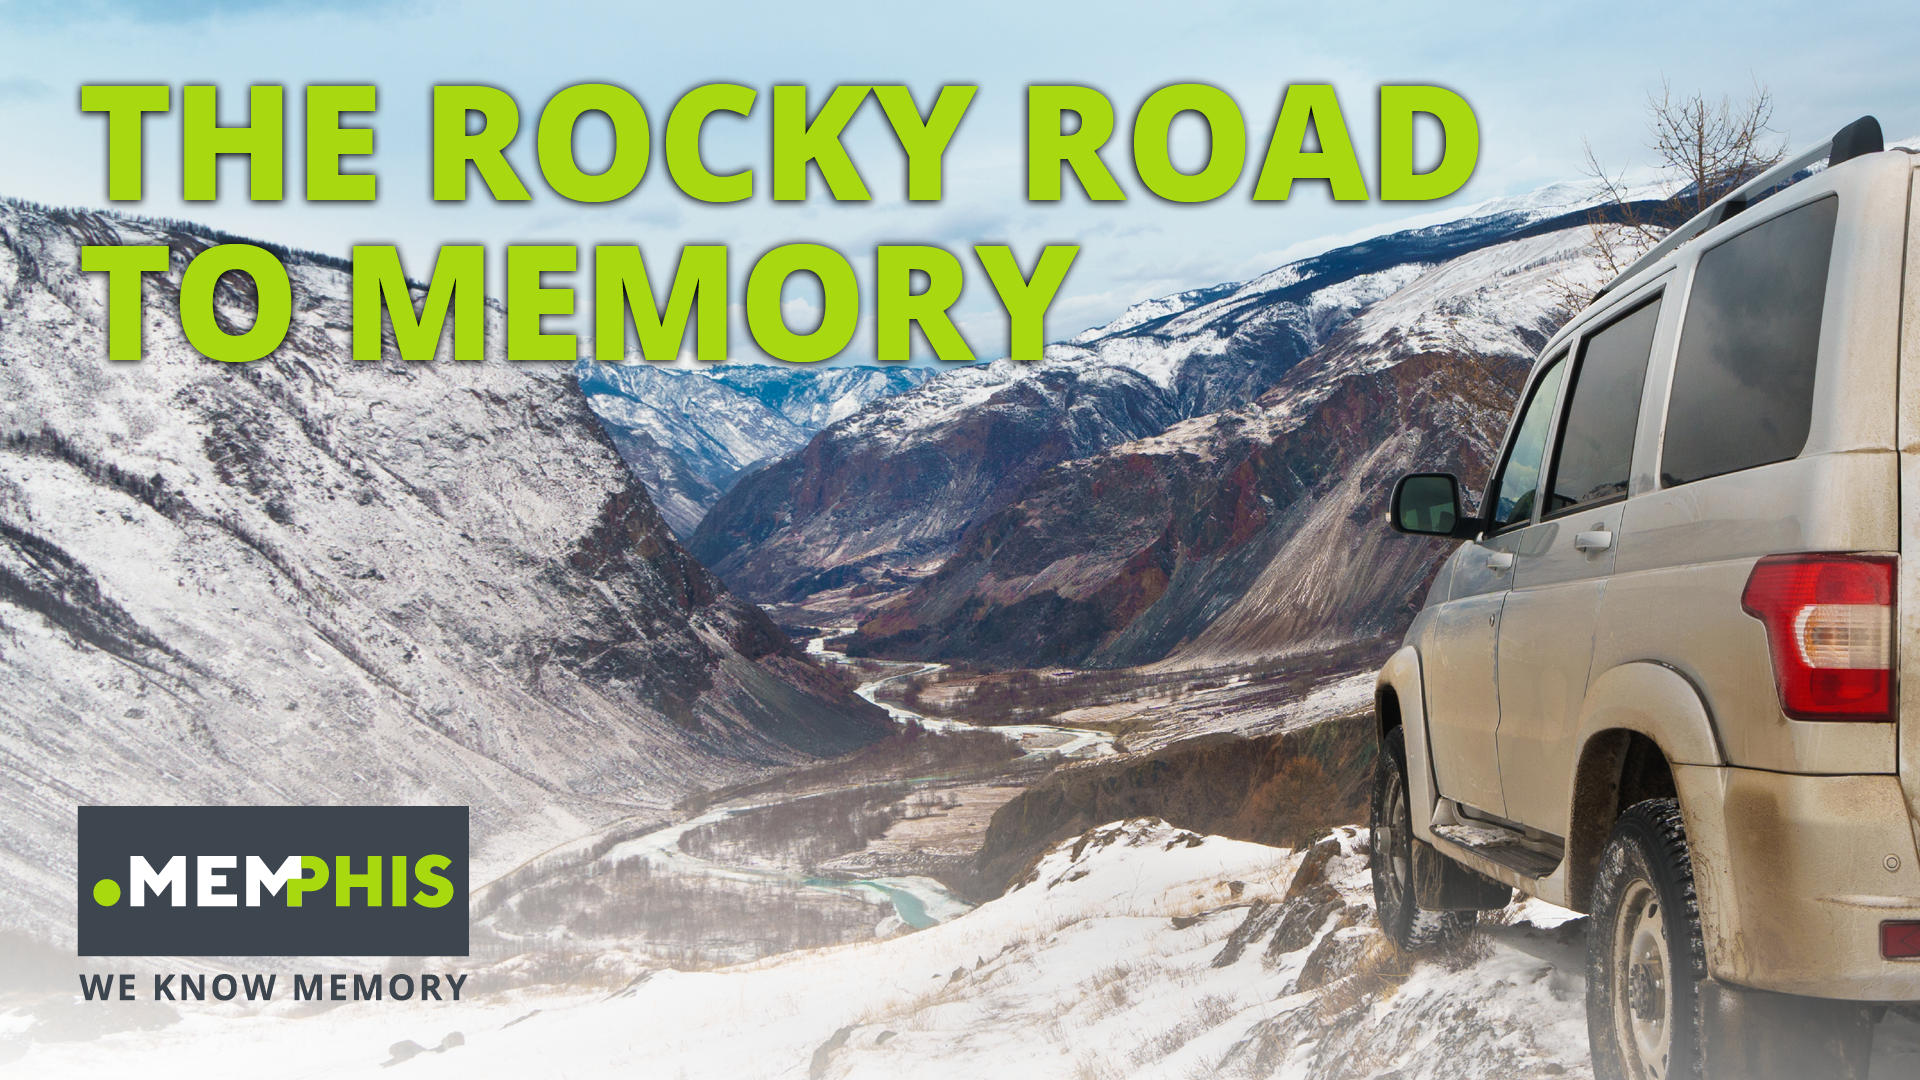 [Translate to Englisch:] The roads in semiconductor memory are rocky